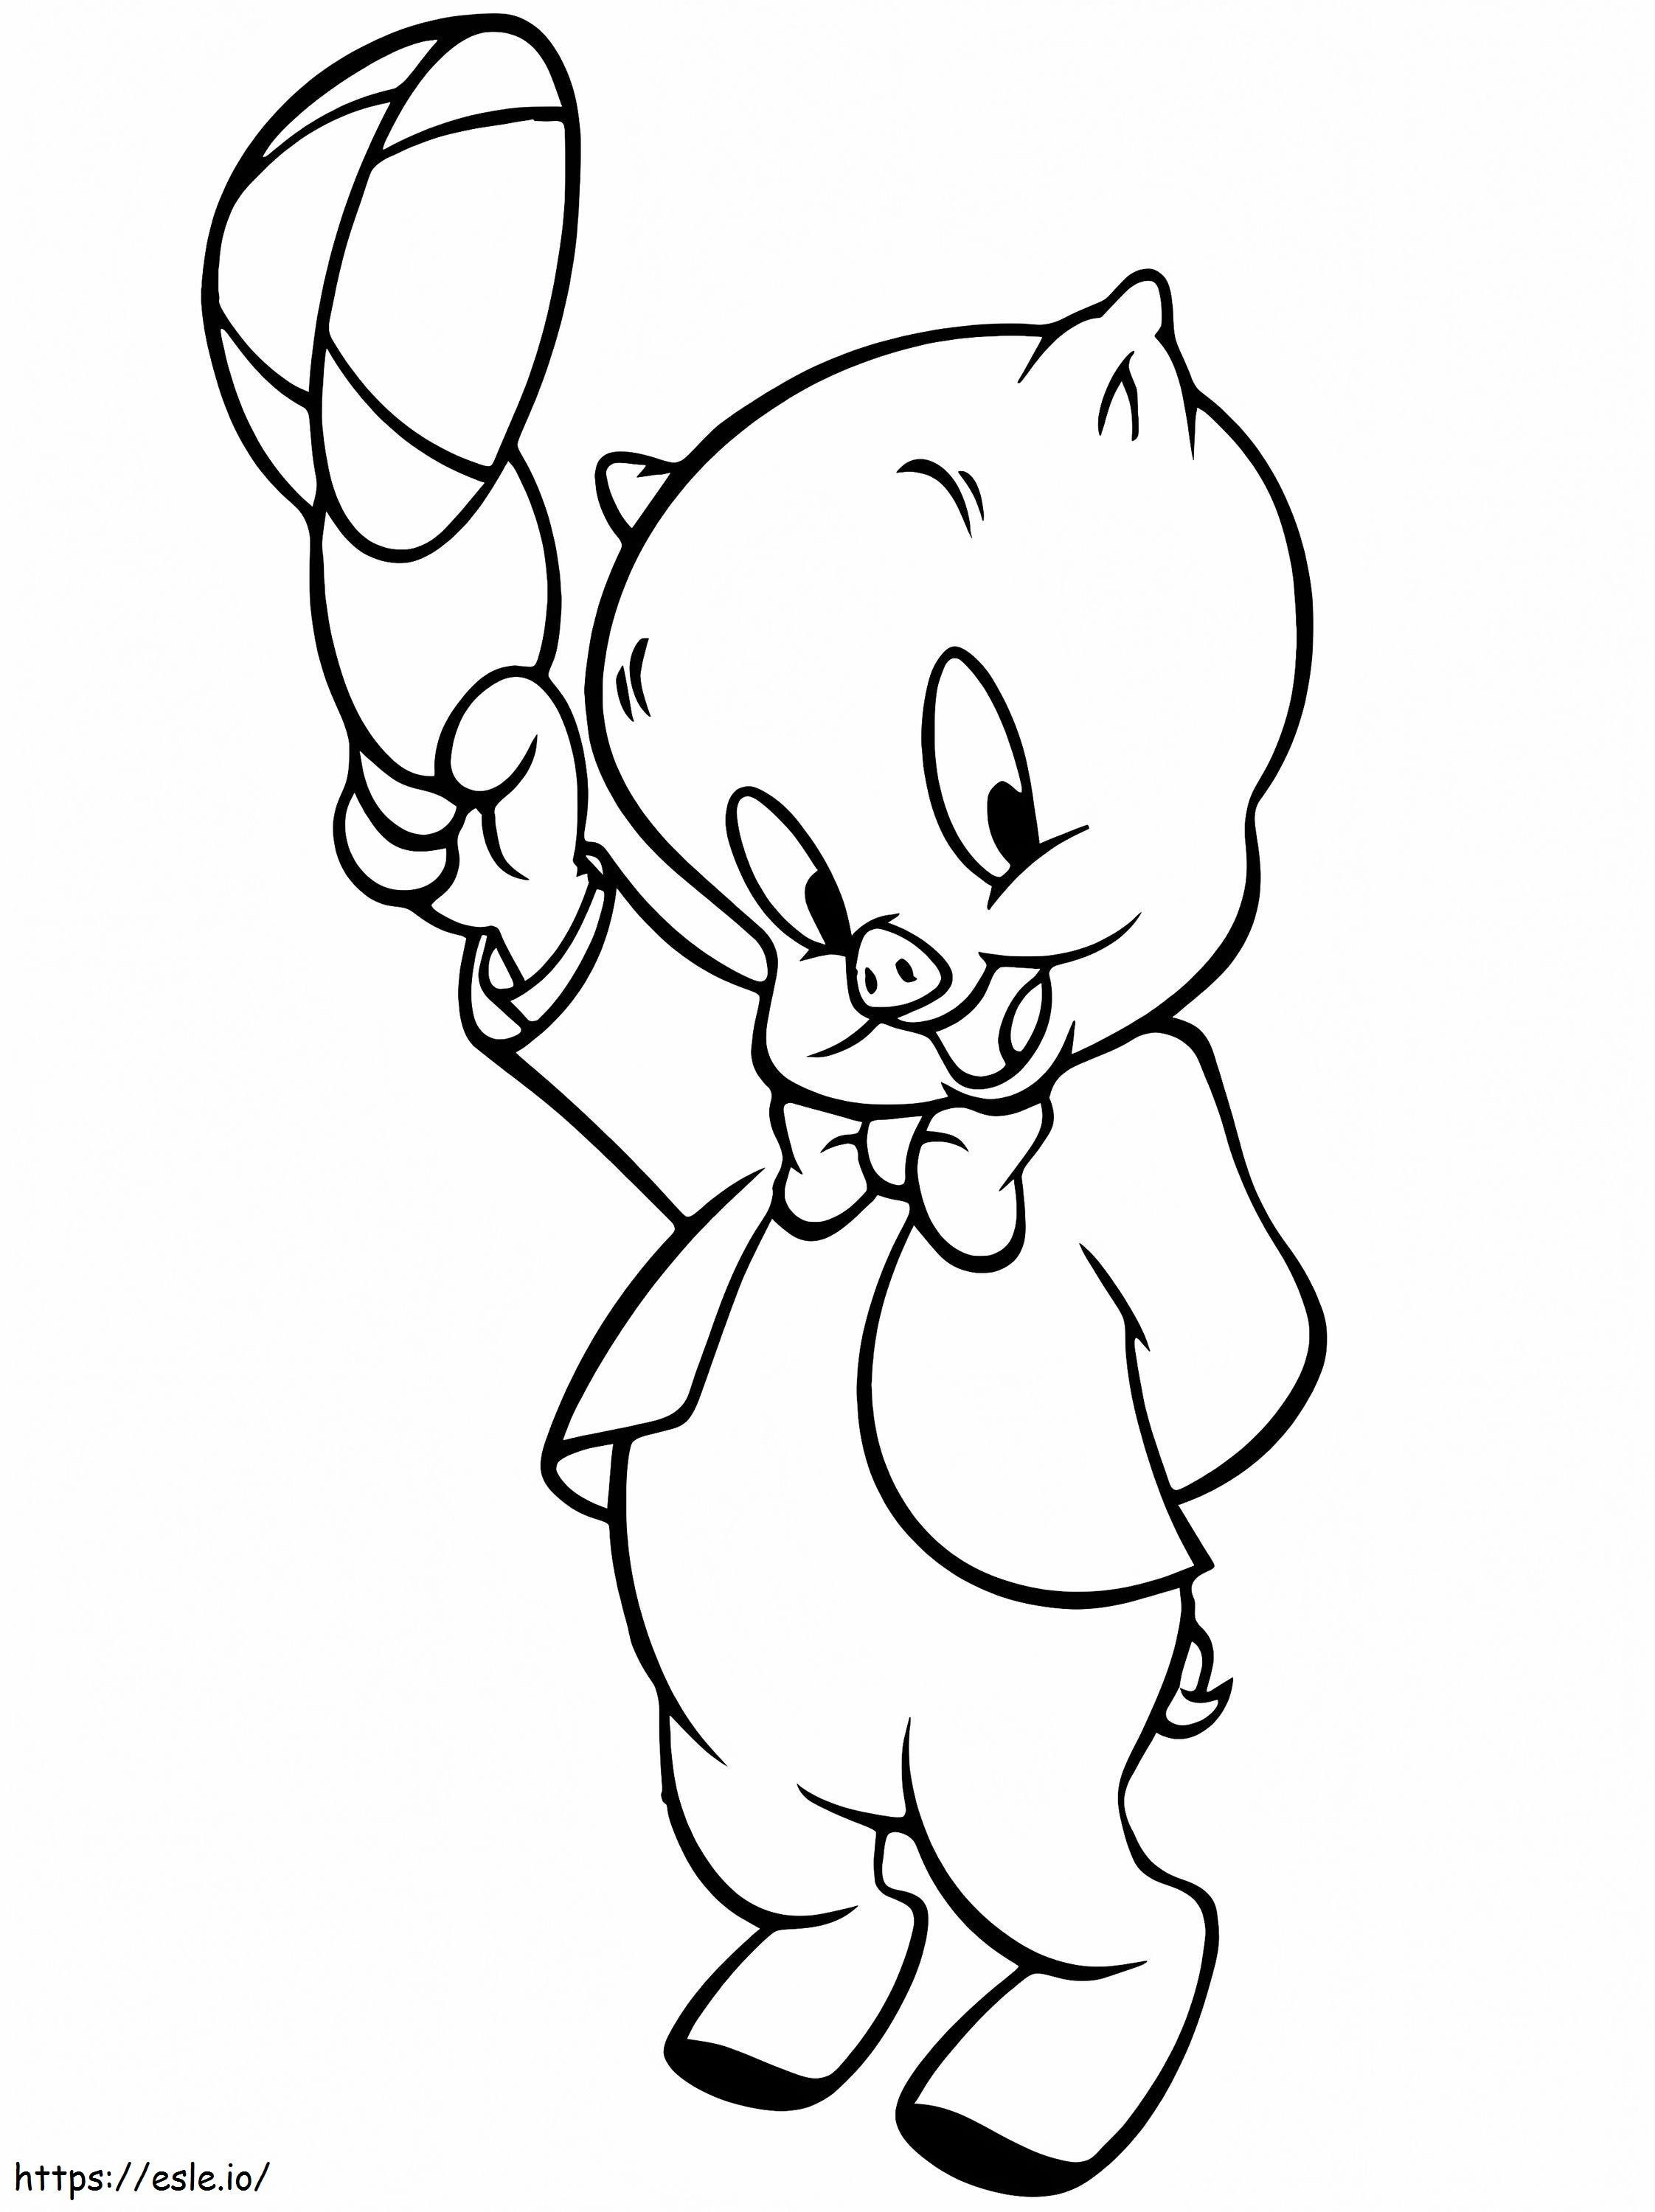 Porky Pig 4 coloring page